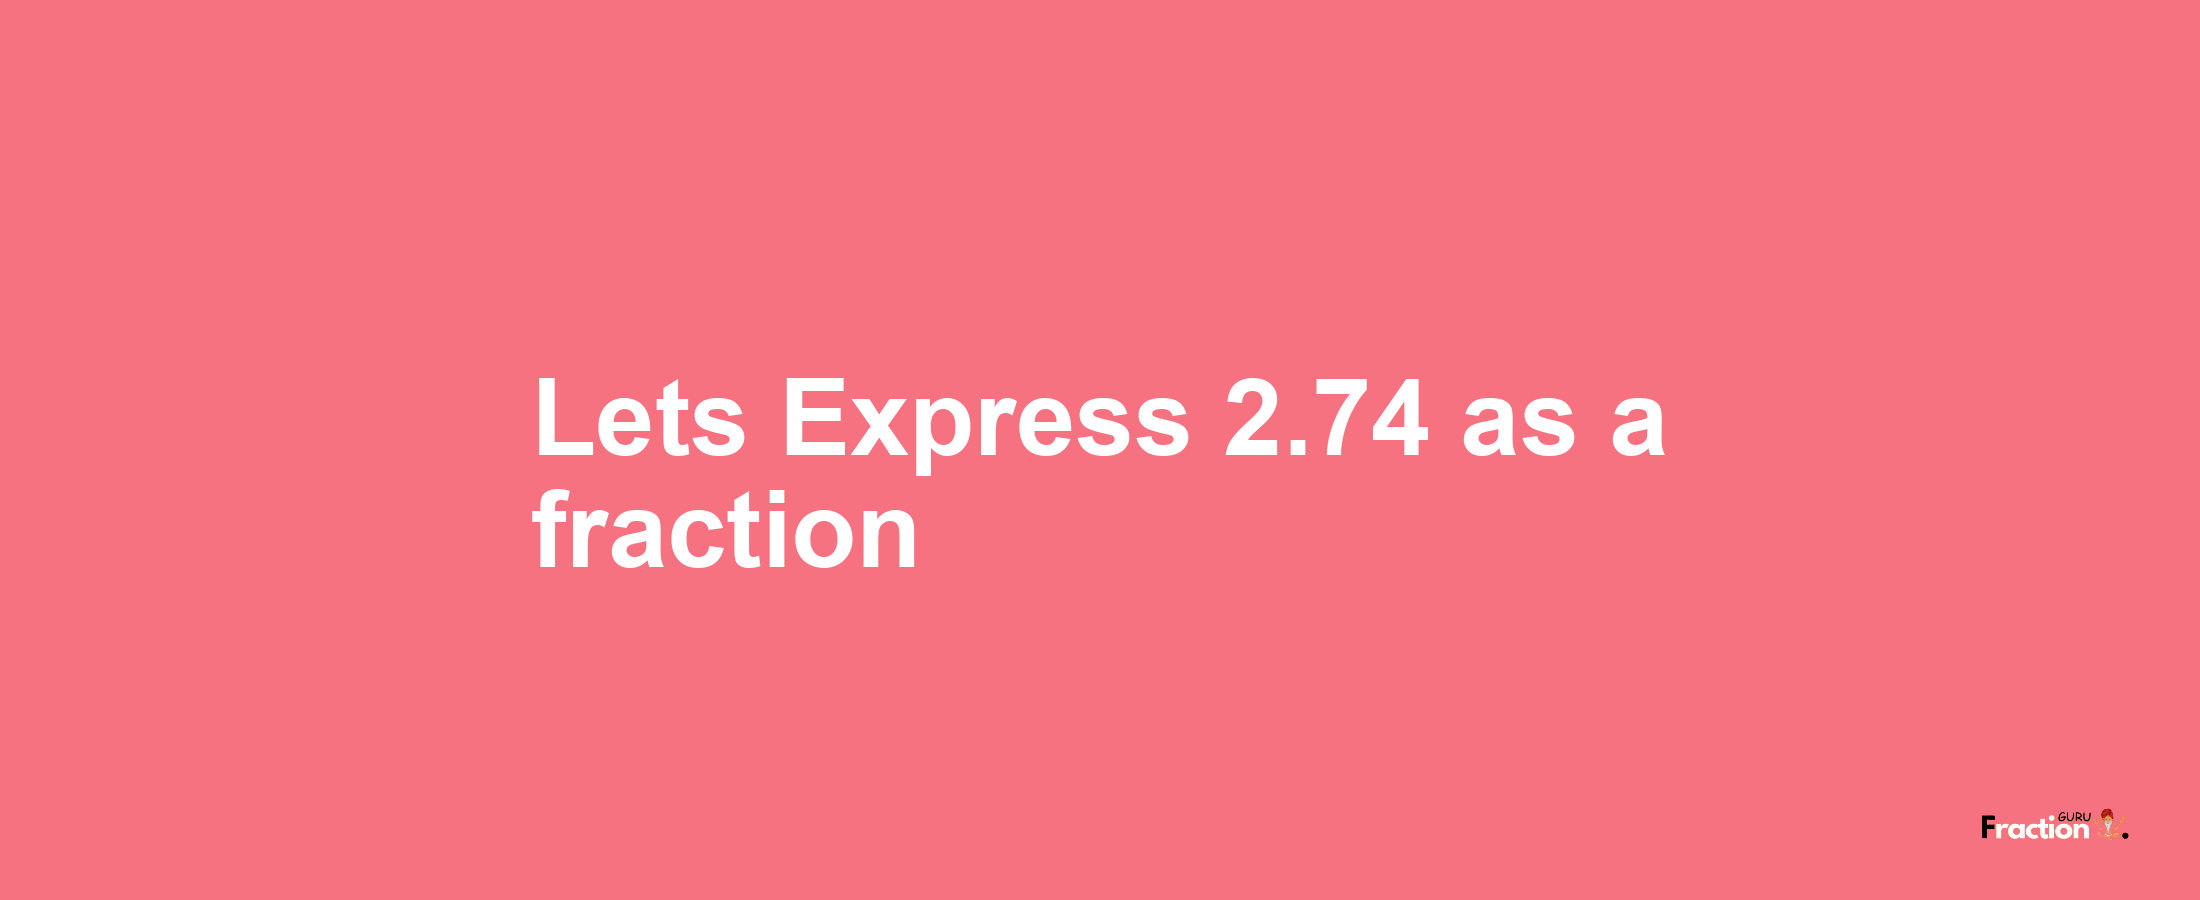 Lets Express 2.74 as afraction